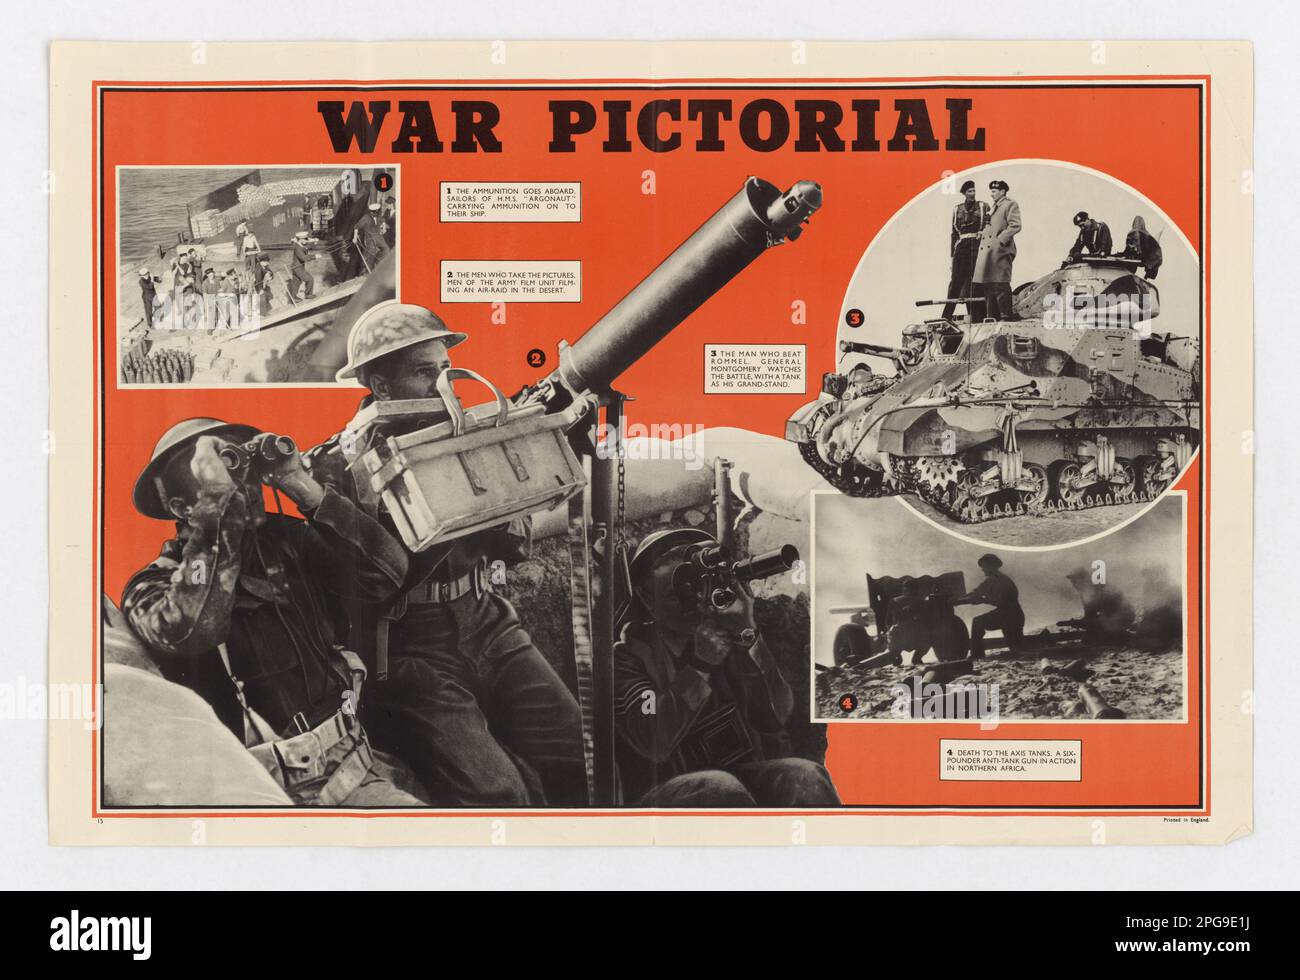 War Pictorial. Country: England. 1942 - 1945.  Office for Emergency Management. Office of War Information. Domestic Operations Branch. Bureau of Special Services. 3/9/1943-9/15/1945. World War II Foreign Posters Stock Photo